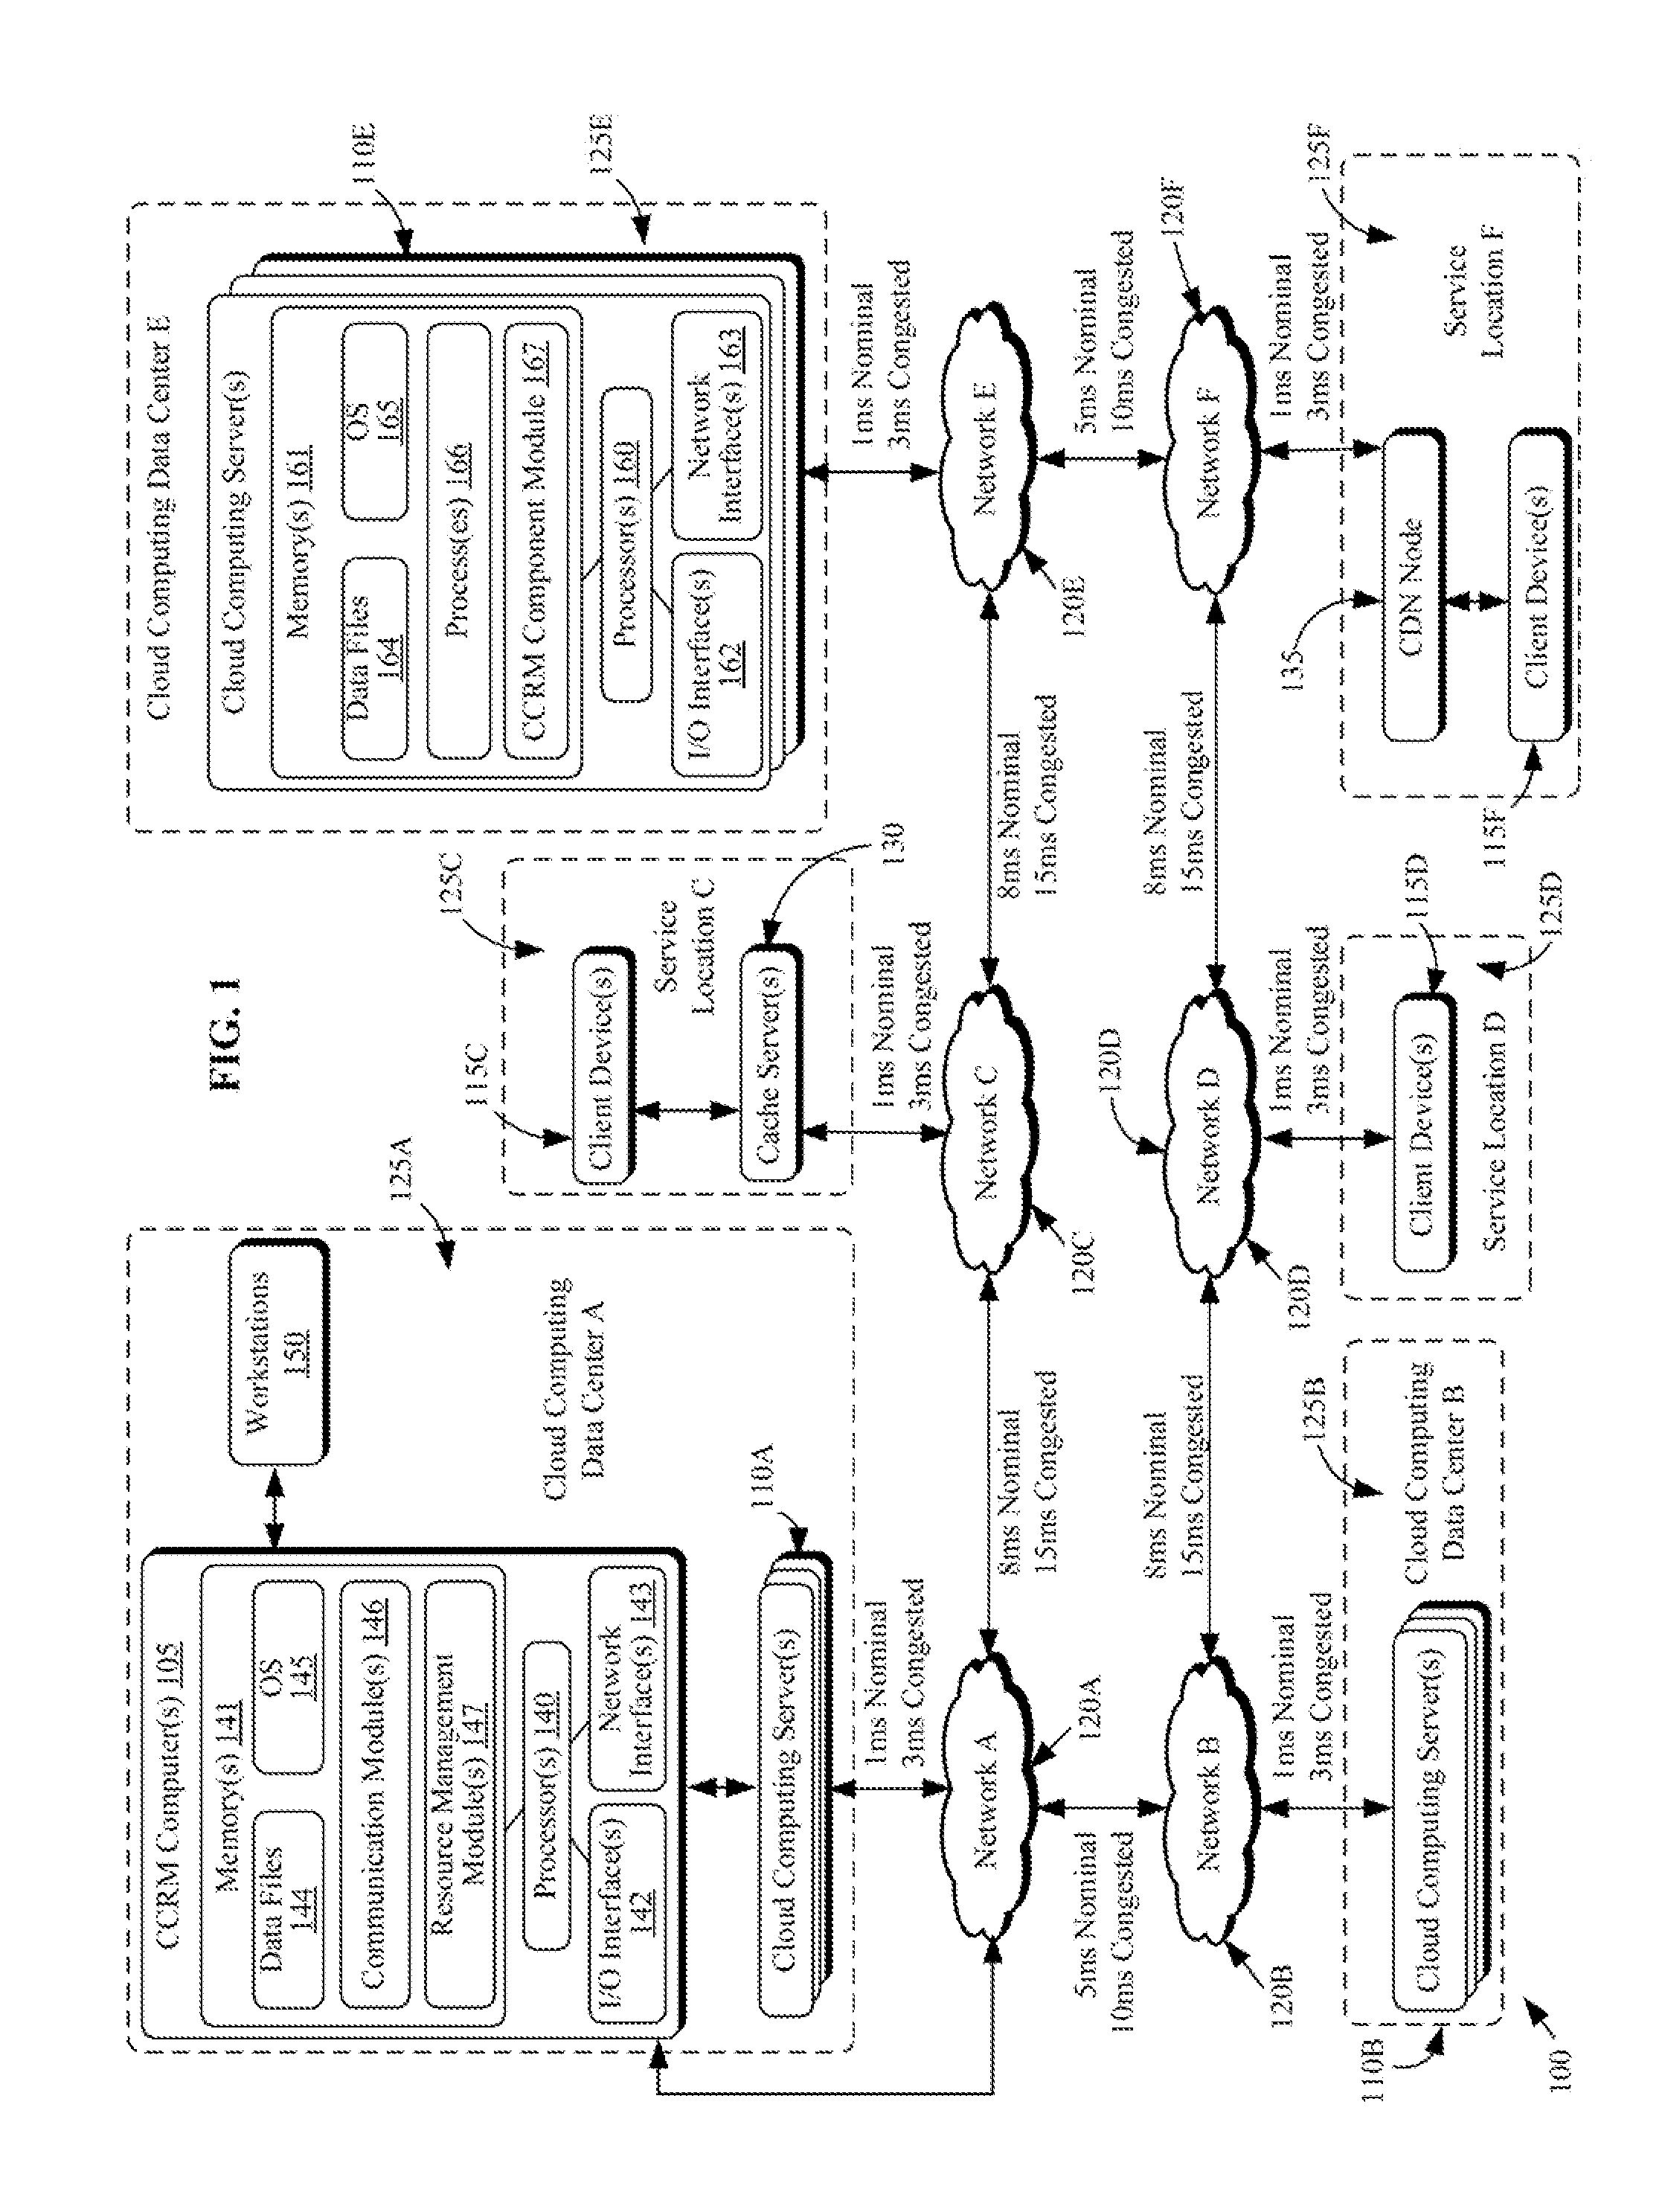 Systems and methods for managing cloud computing resources